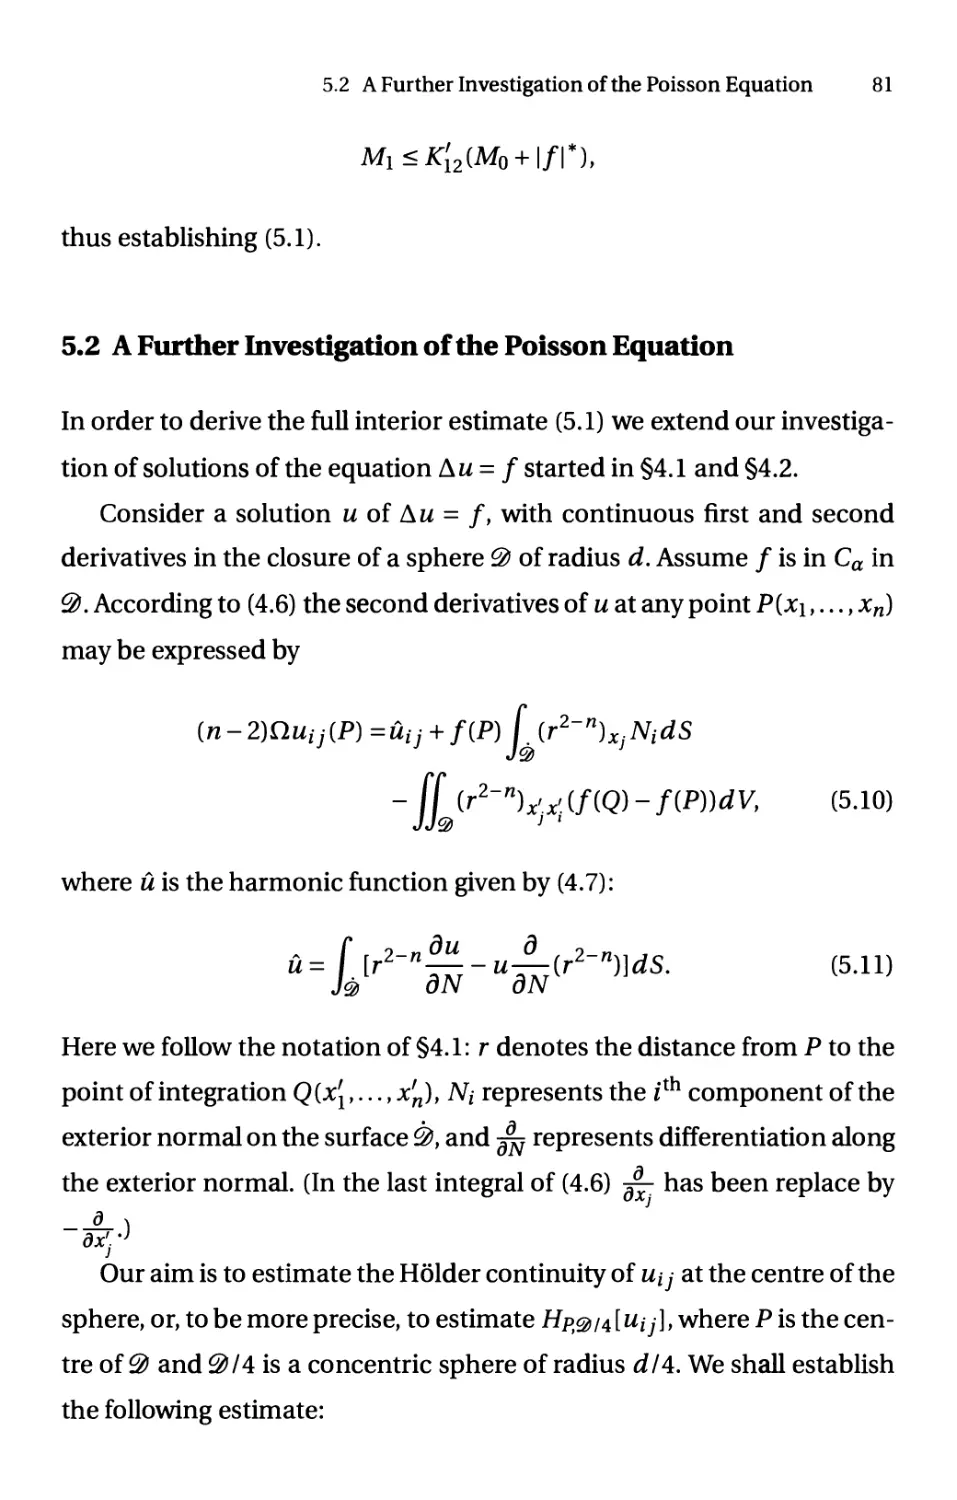 5.2 A Further Investigation of the Poisson Equation